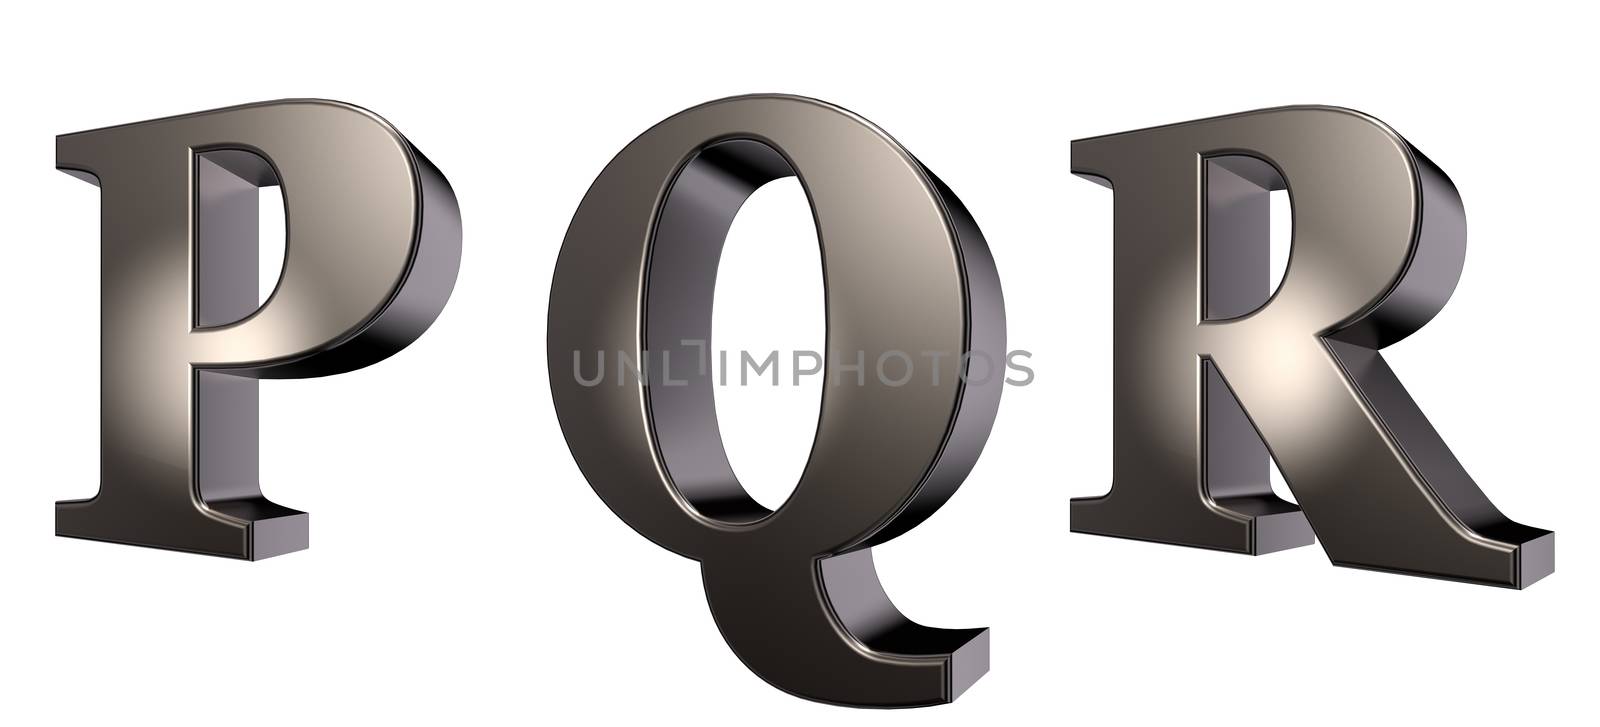 metal letters p, q and r on white background - 3d illustration